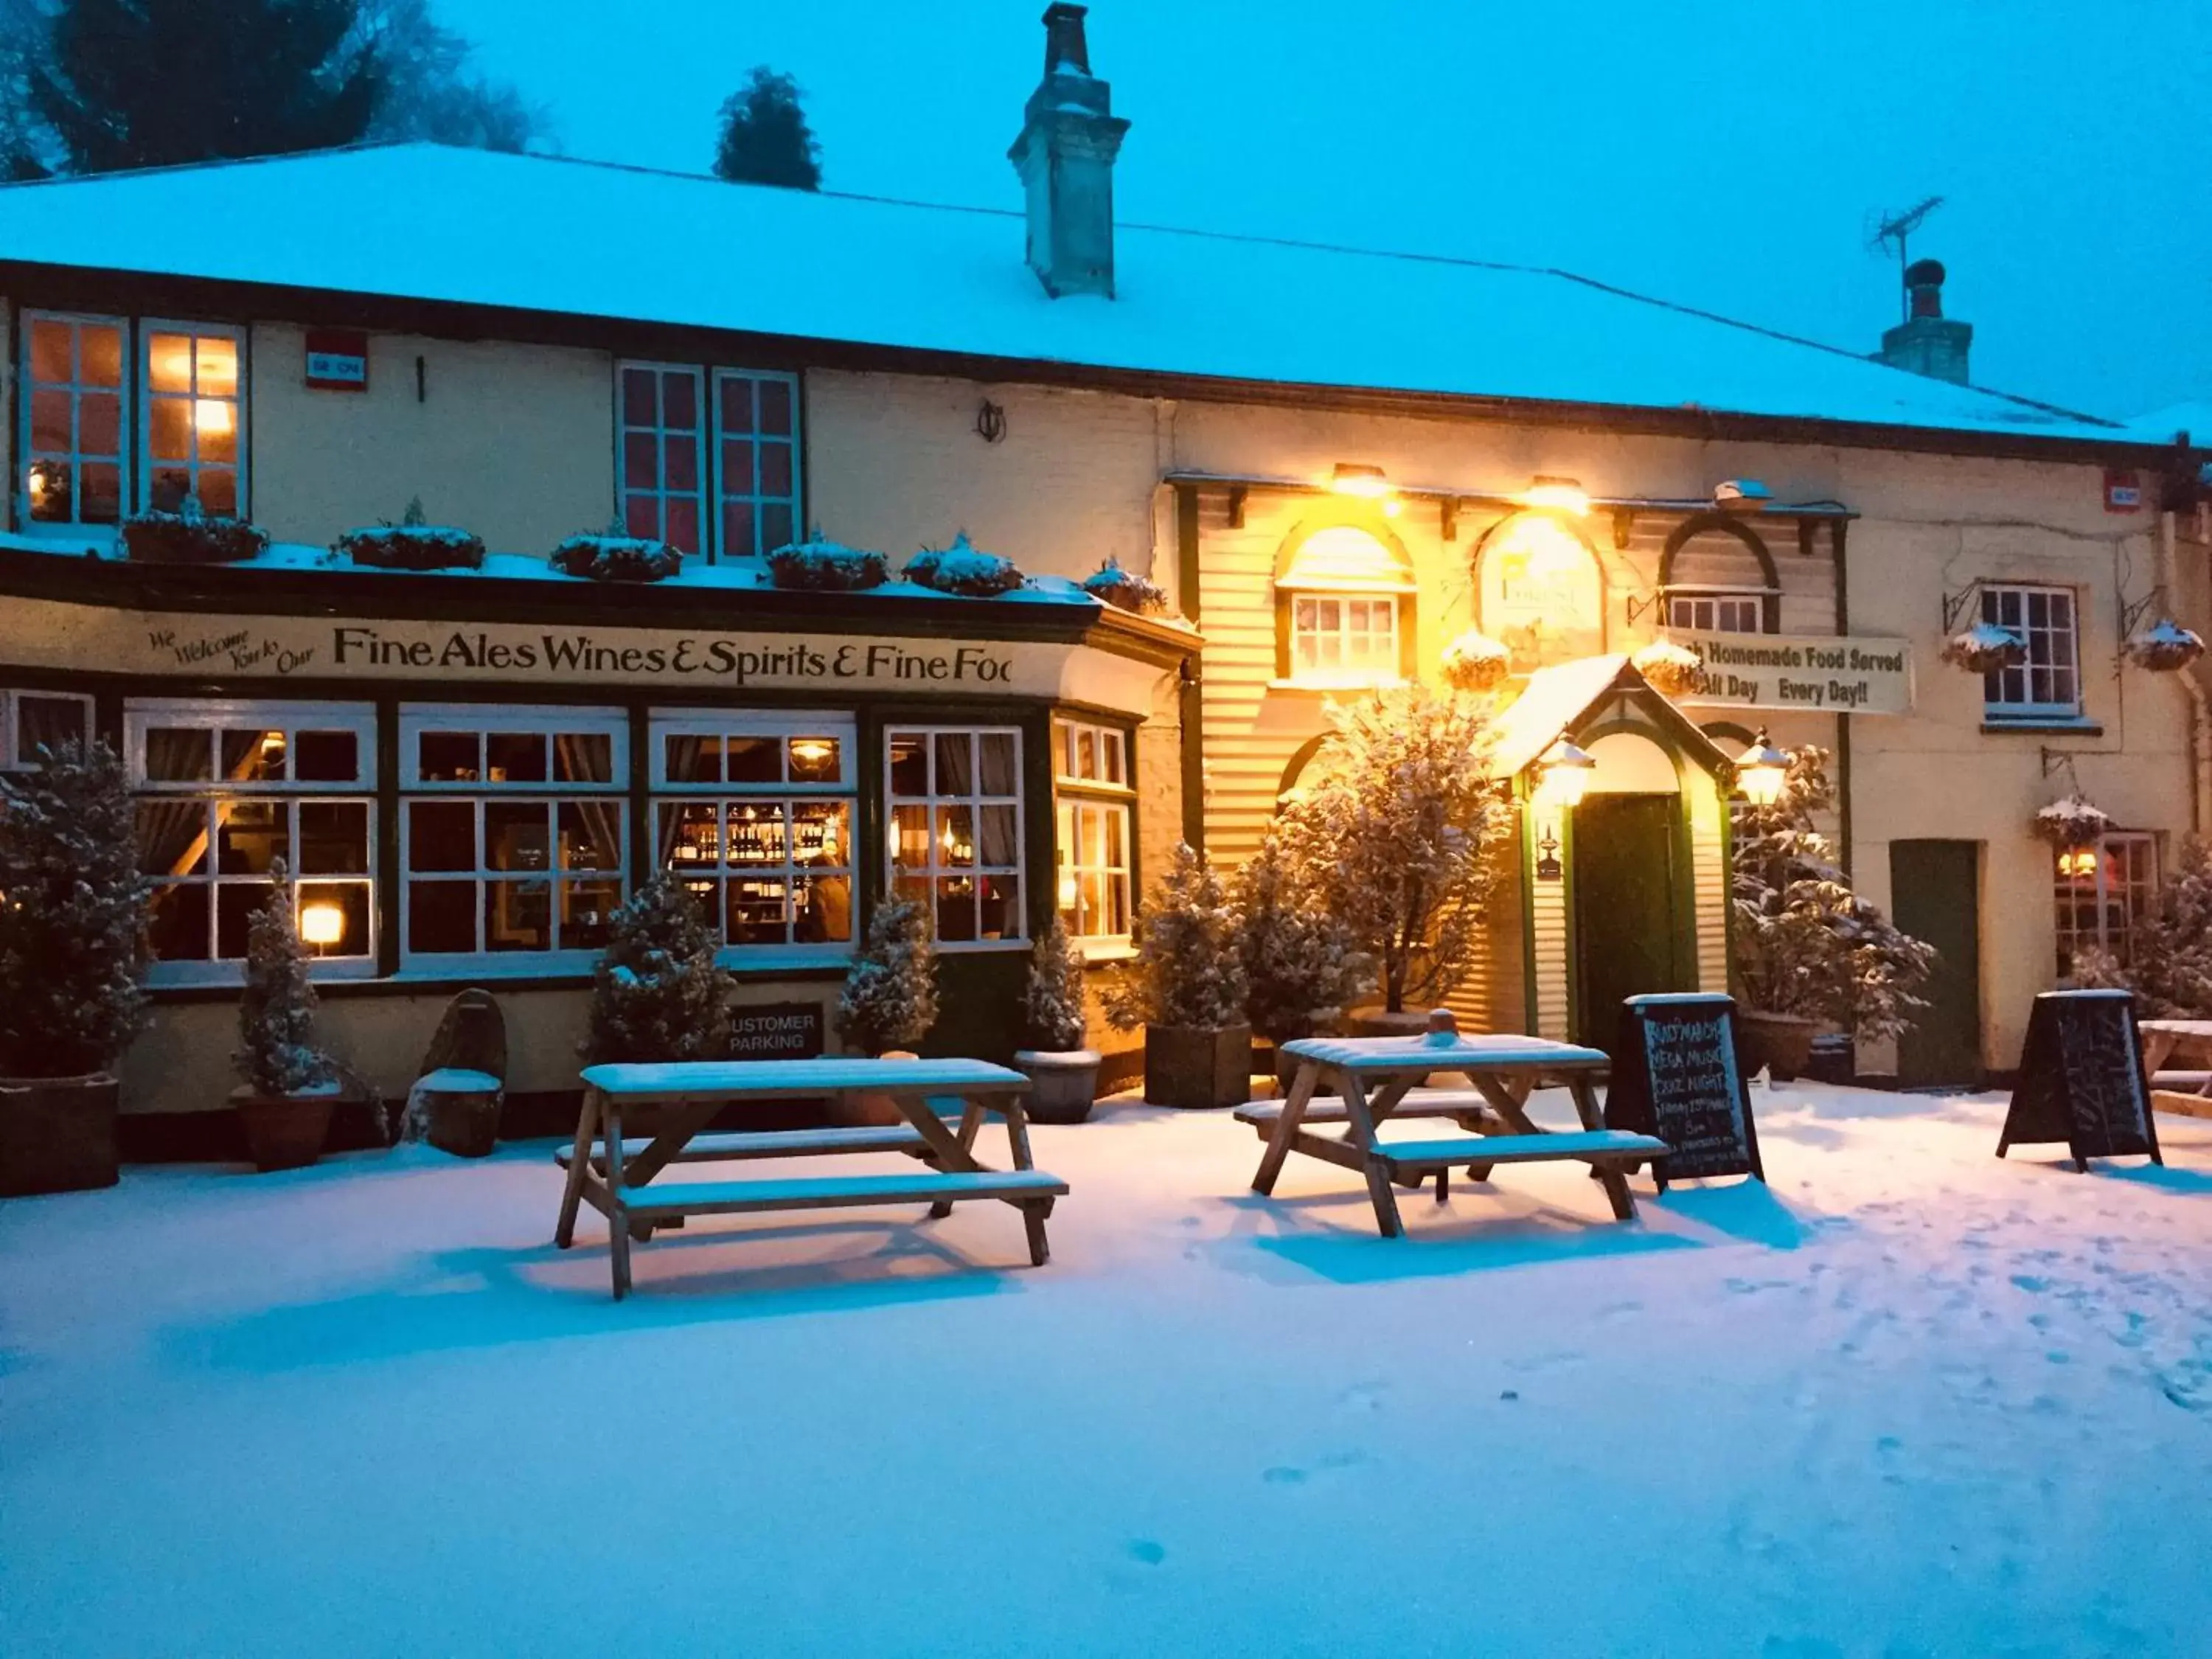 Winter in The New Forest Inn